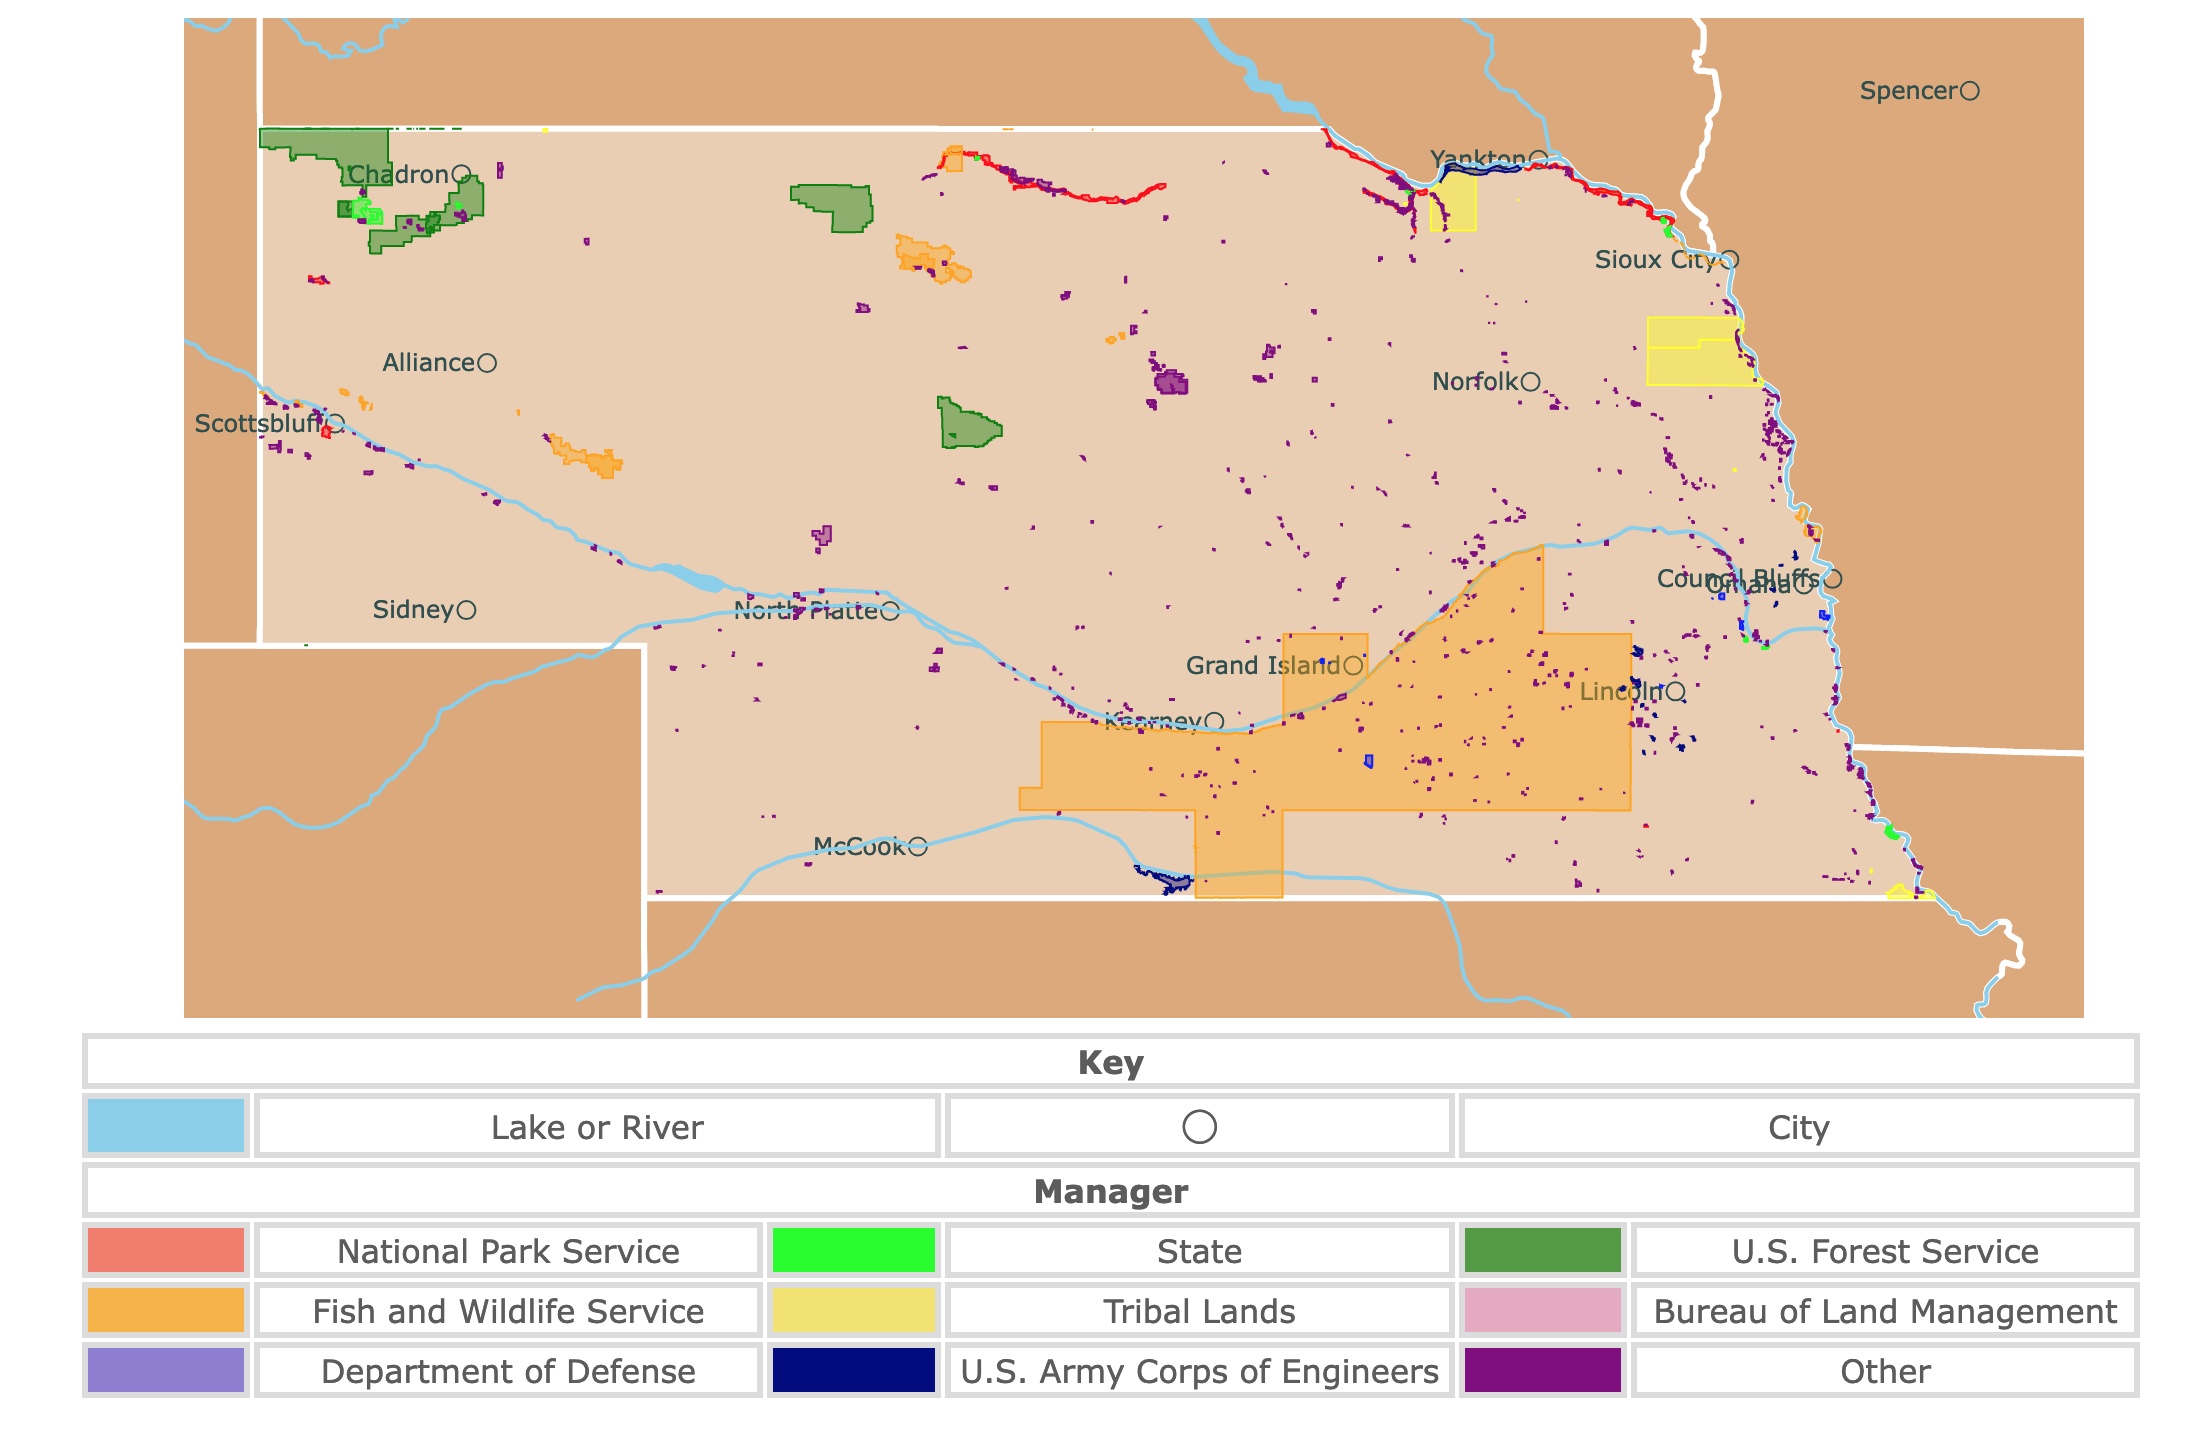 Map of Nebraska's state parks, national parks, forests, and public lands areas